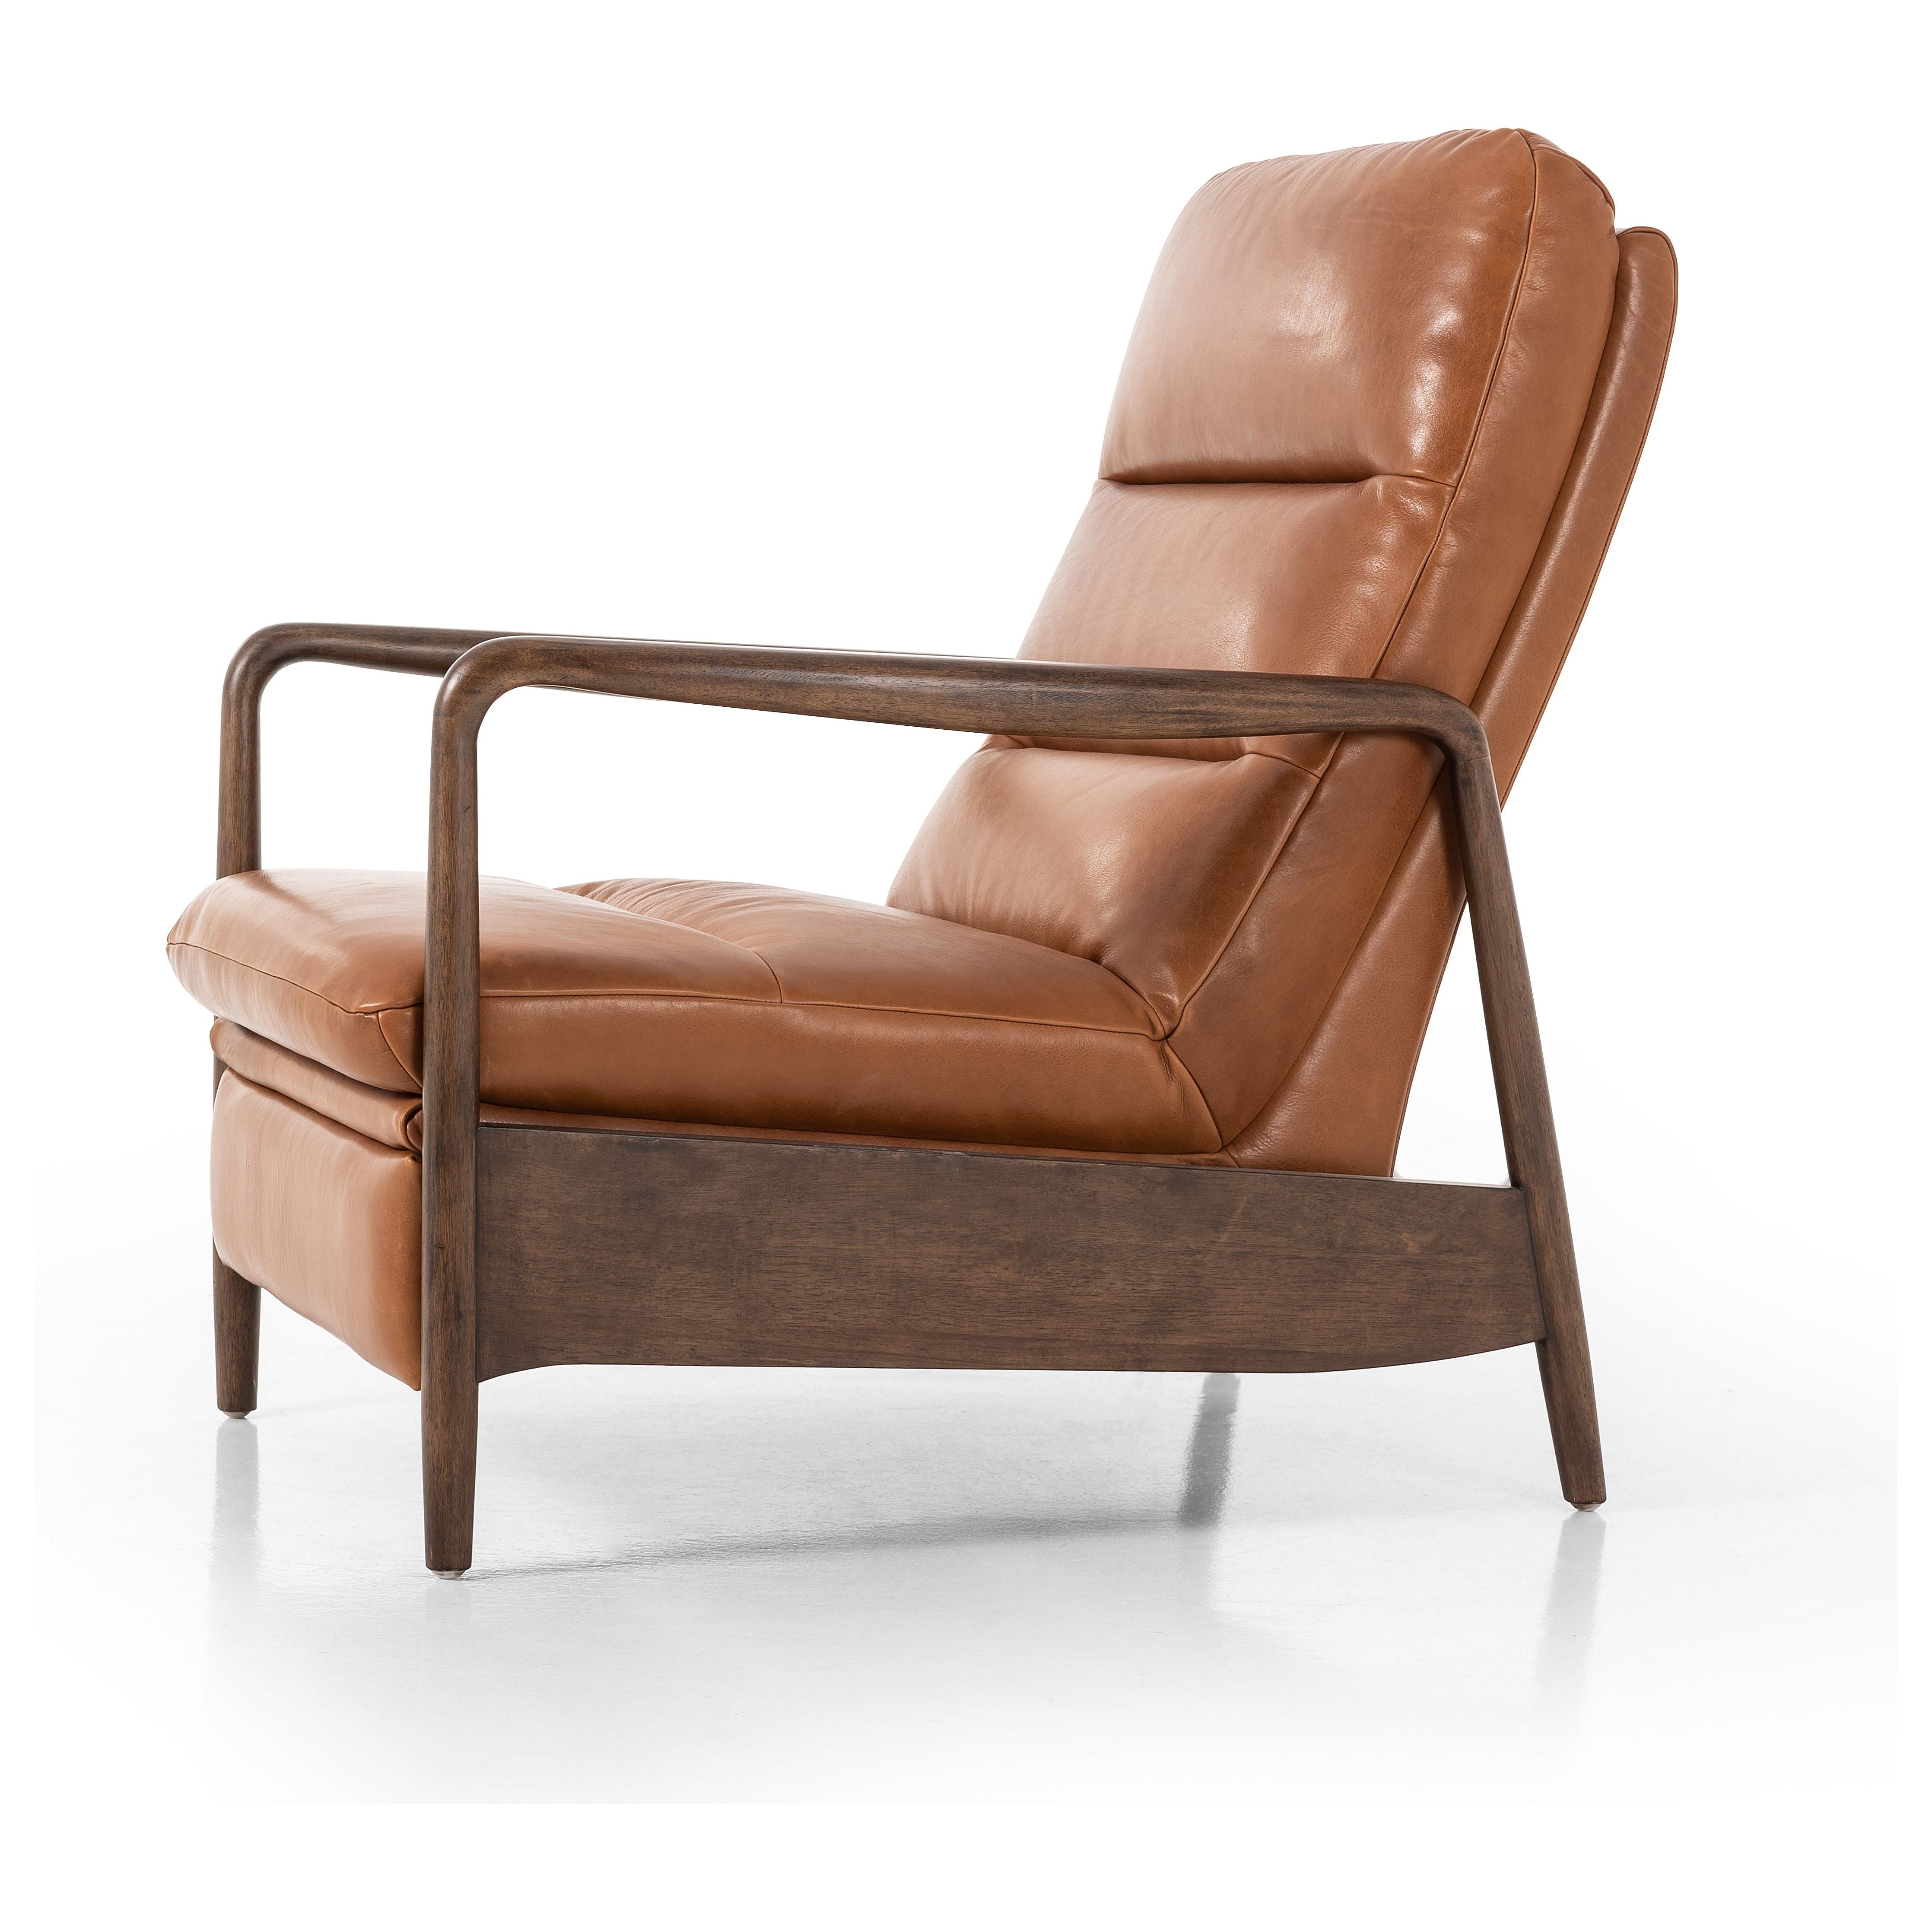 A sleek seat with hidden push-back reclining functionality. This midcentury-inspired recliner features wide chunky channeling paired with slim paddle arms and a tapered wood frame. Designed with a high seat and high back for extra comfy support. Upholstered in a timeless tobacco-hued leather made in a family-owned tannery in Thailand. Amethyst Home provides interior design, new construction, custom furniture, and area rugs in the Charlotte metro area.